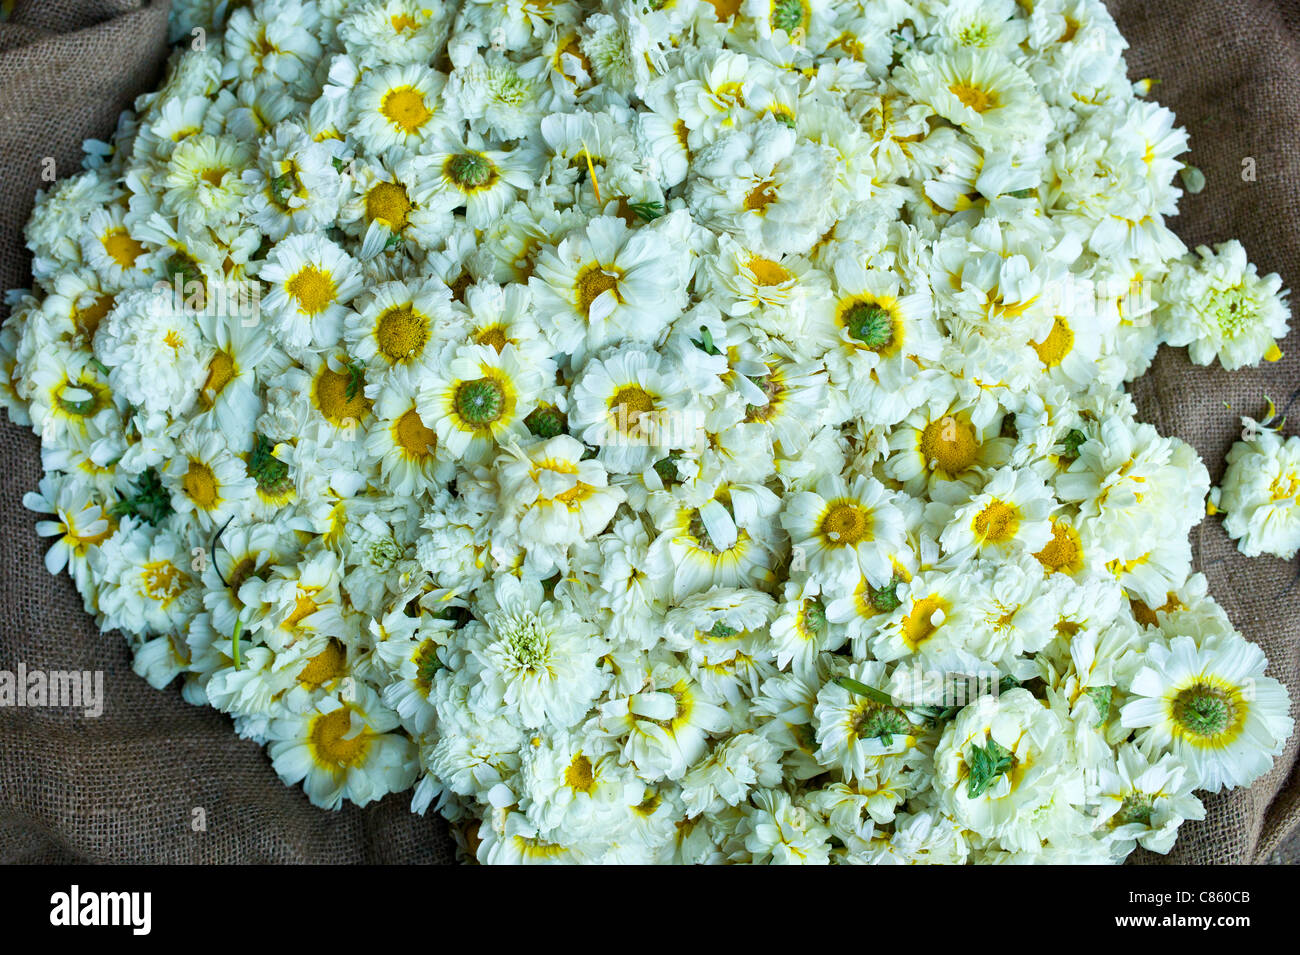 Traditional flowers for garlands and religious ceremonies at Mehrauli Flower Market, New Delhi Stock Photo